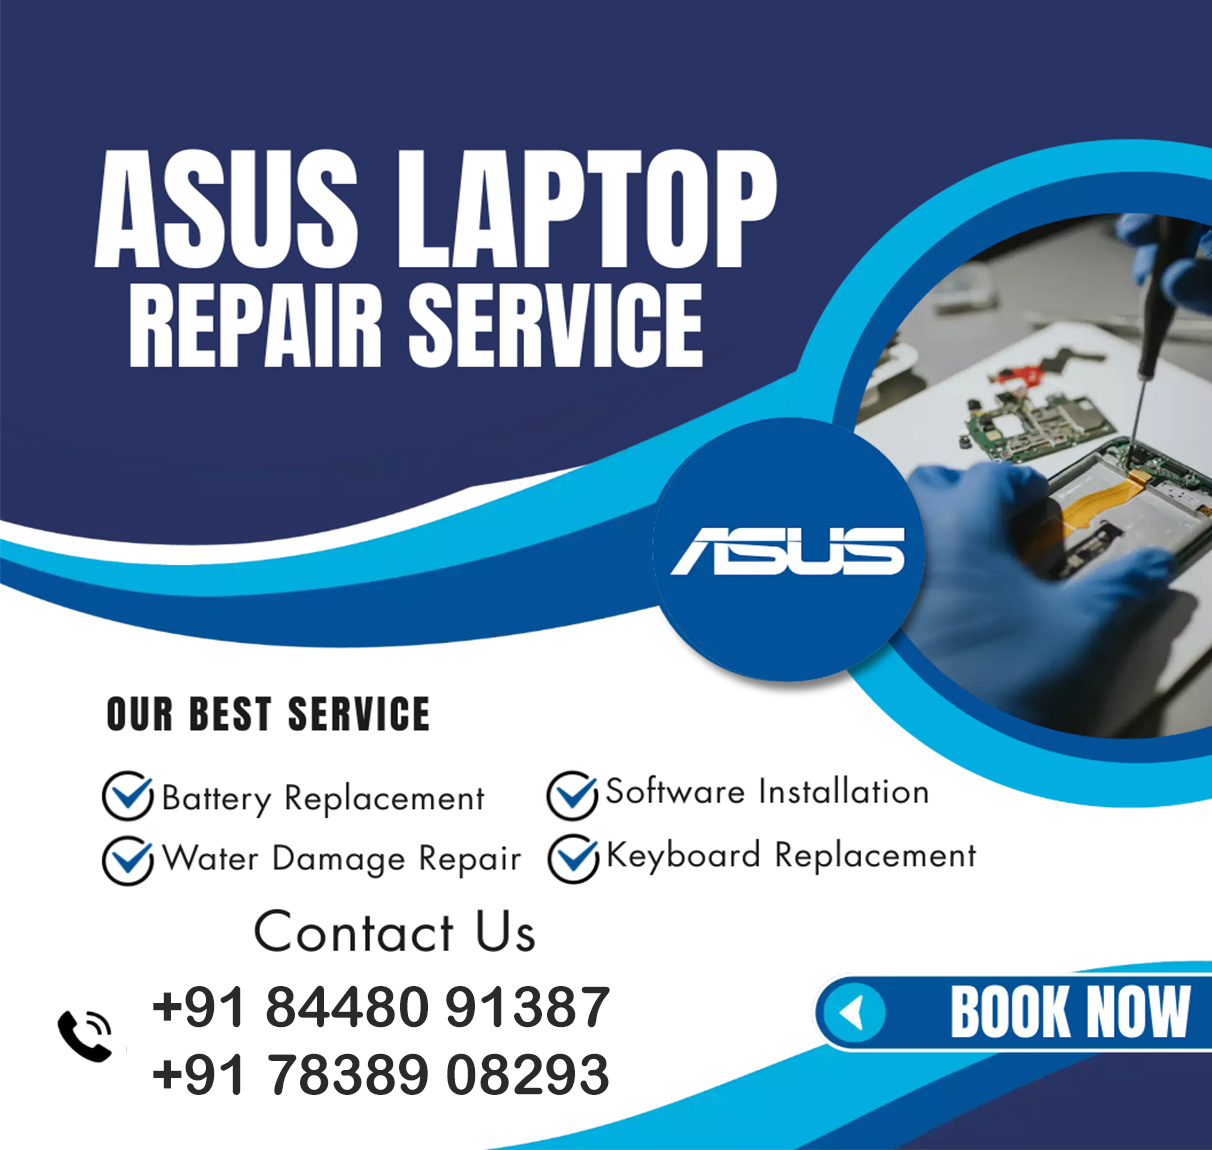 Asus Service Center Camp pune in Pune